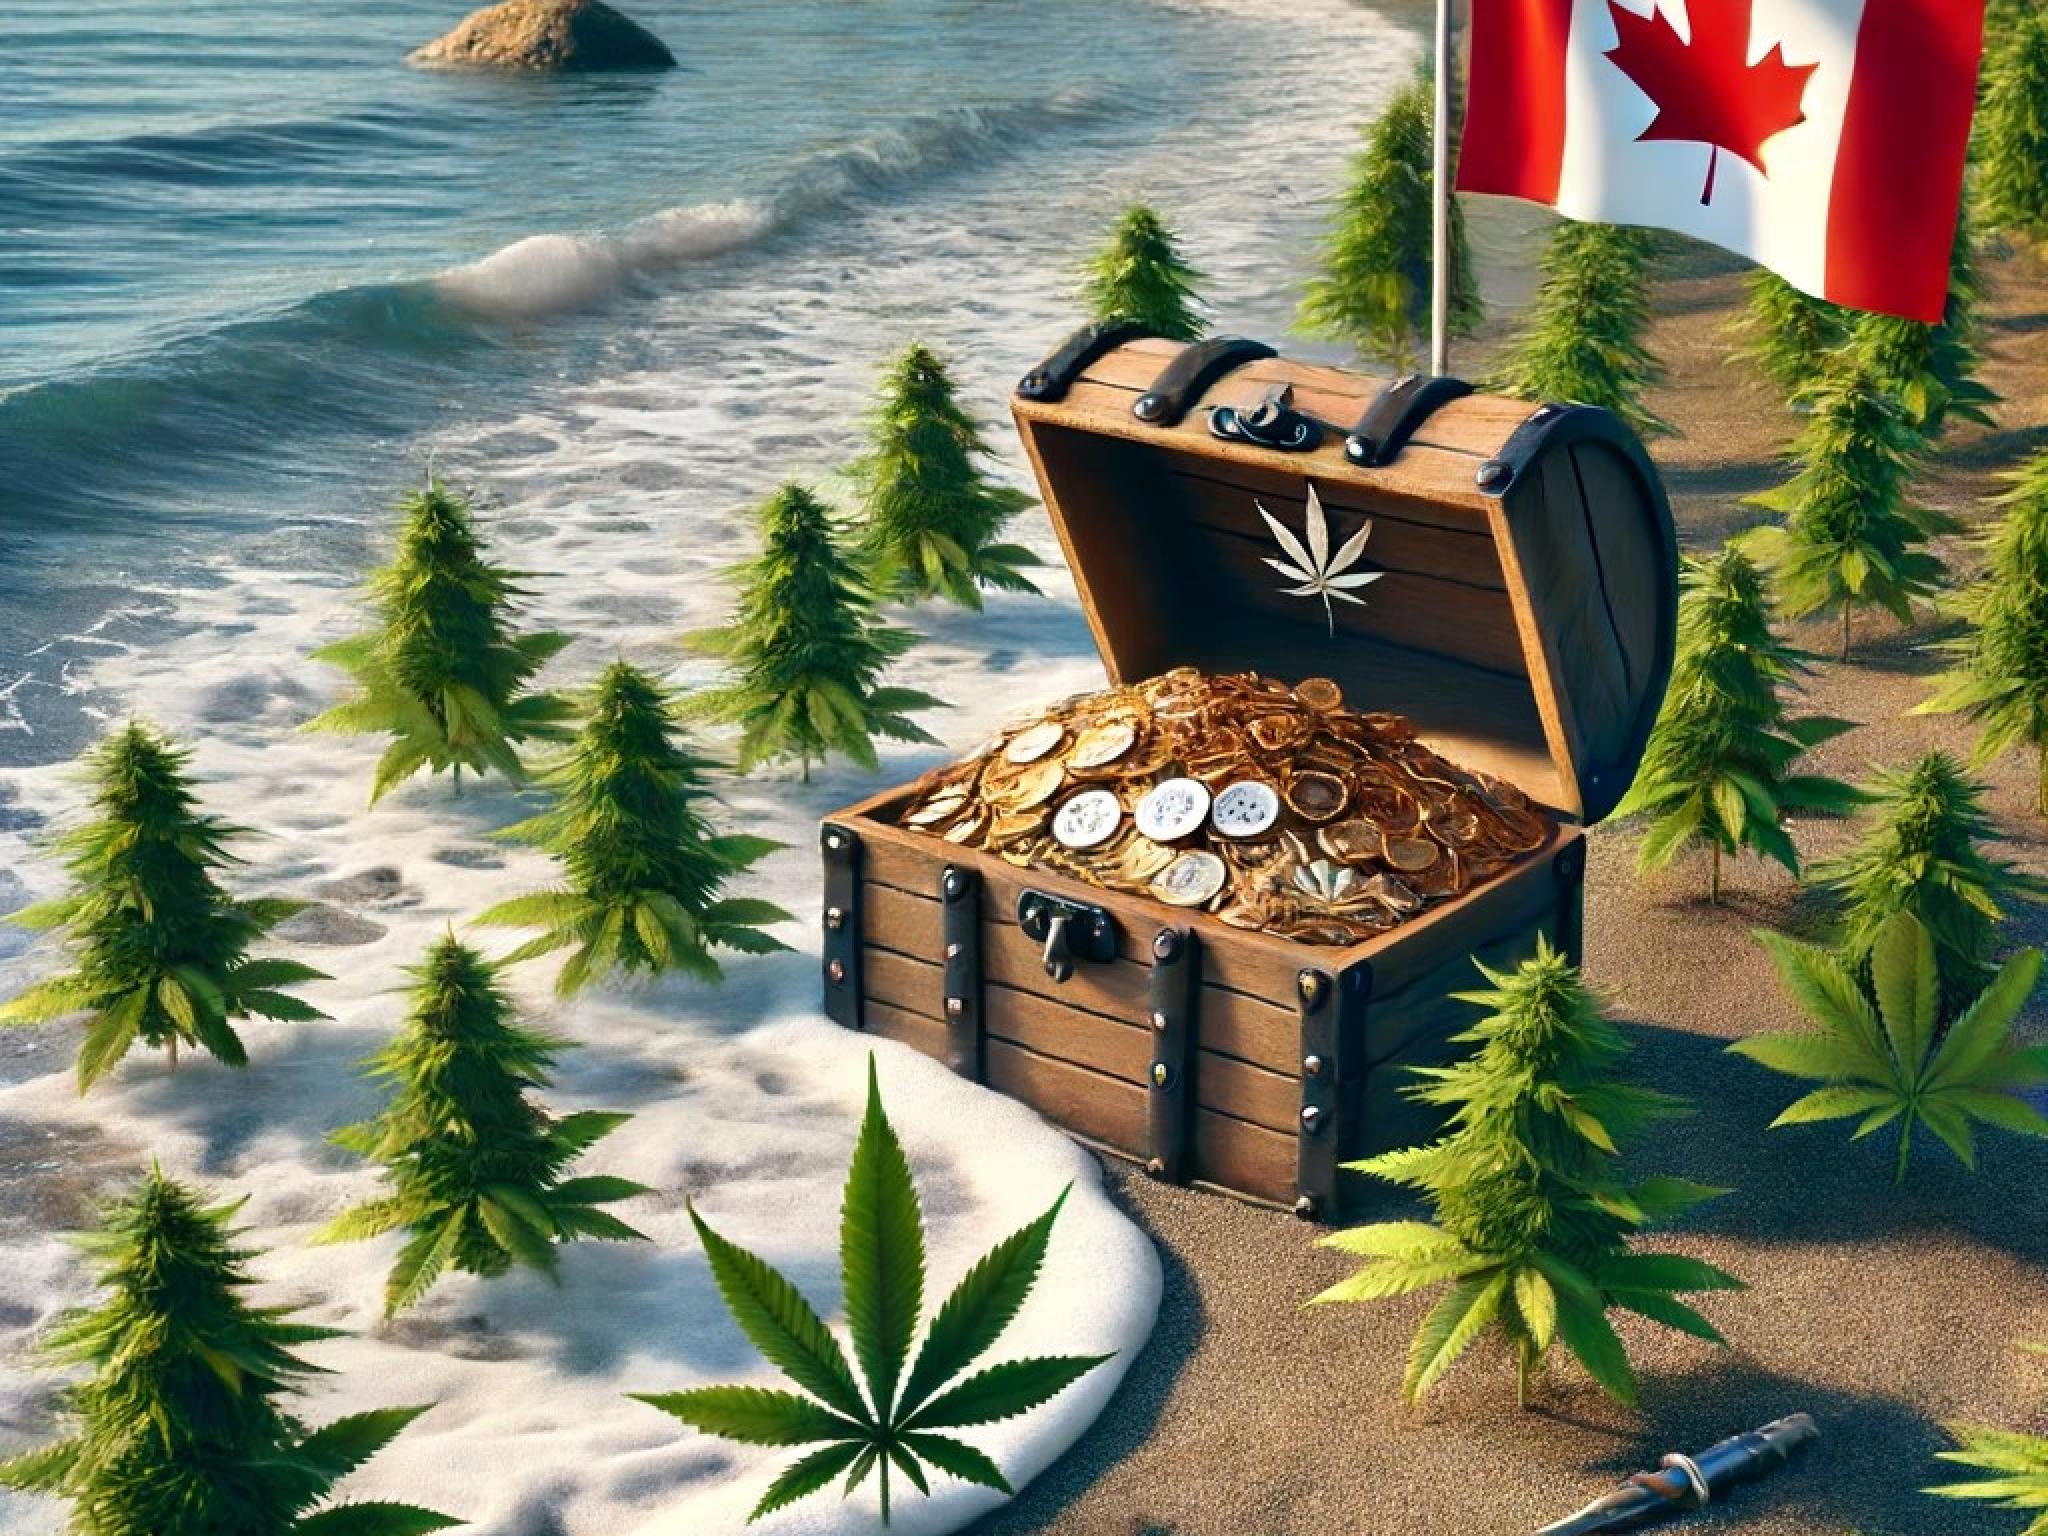  high-tide-reports-345m-cash-position-sells-1400-shares-in-q2-expands-cannabis-footprint 